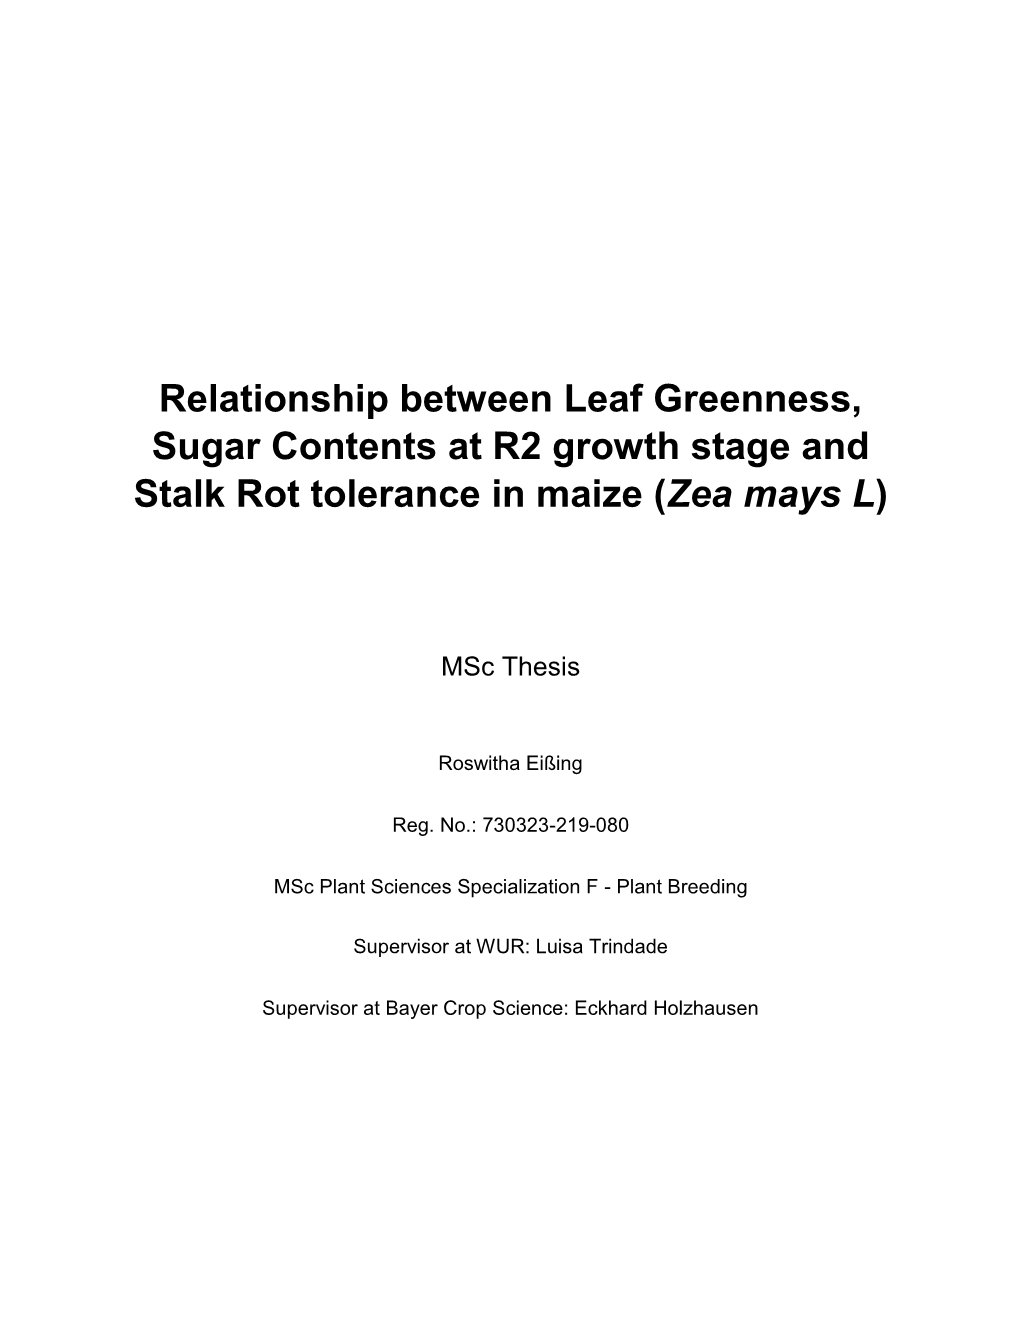 Relationship Between Leaf Greenness, Sugar Contents at R2 Growth Stage and Stalk Rot Tolerance in Maize (Zea Mays L)